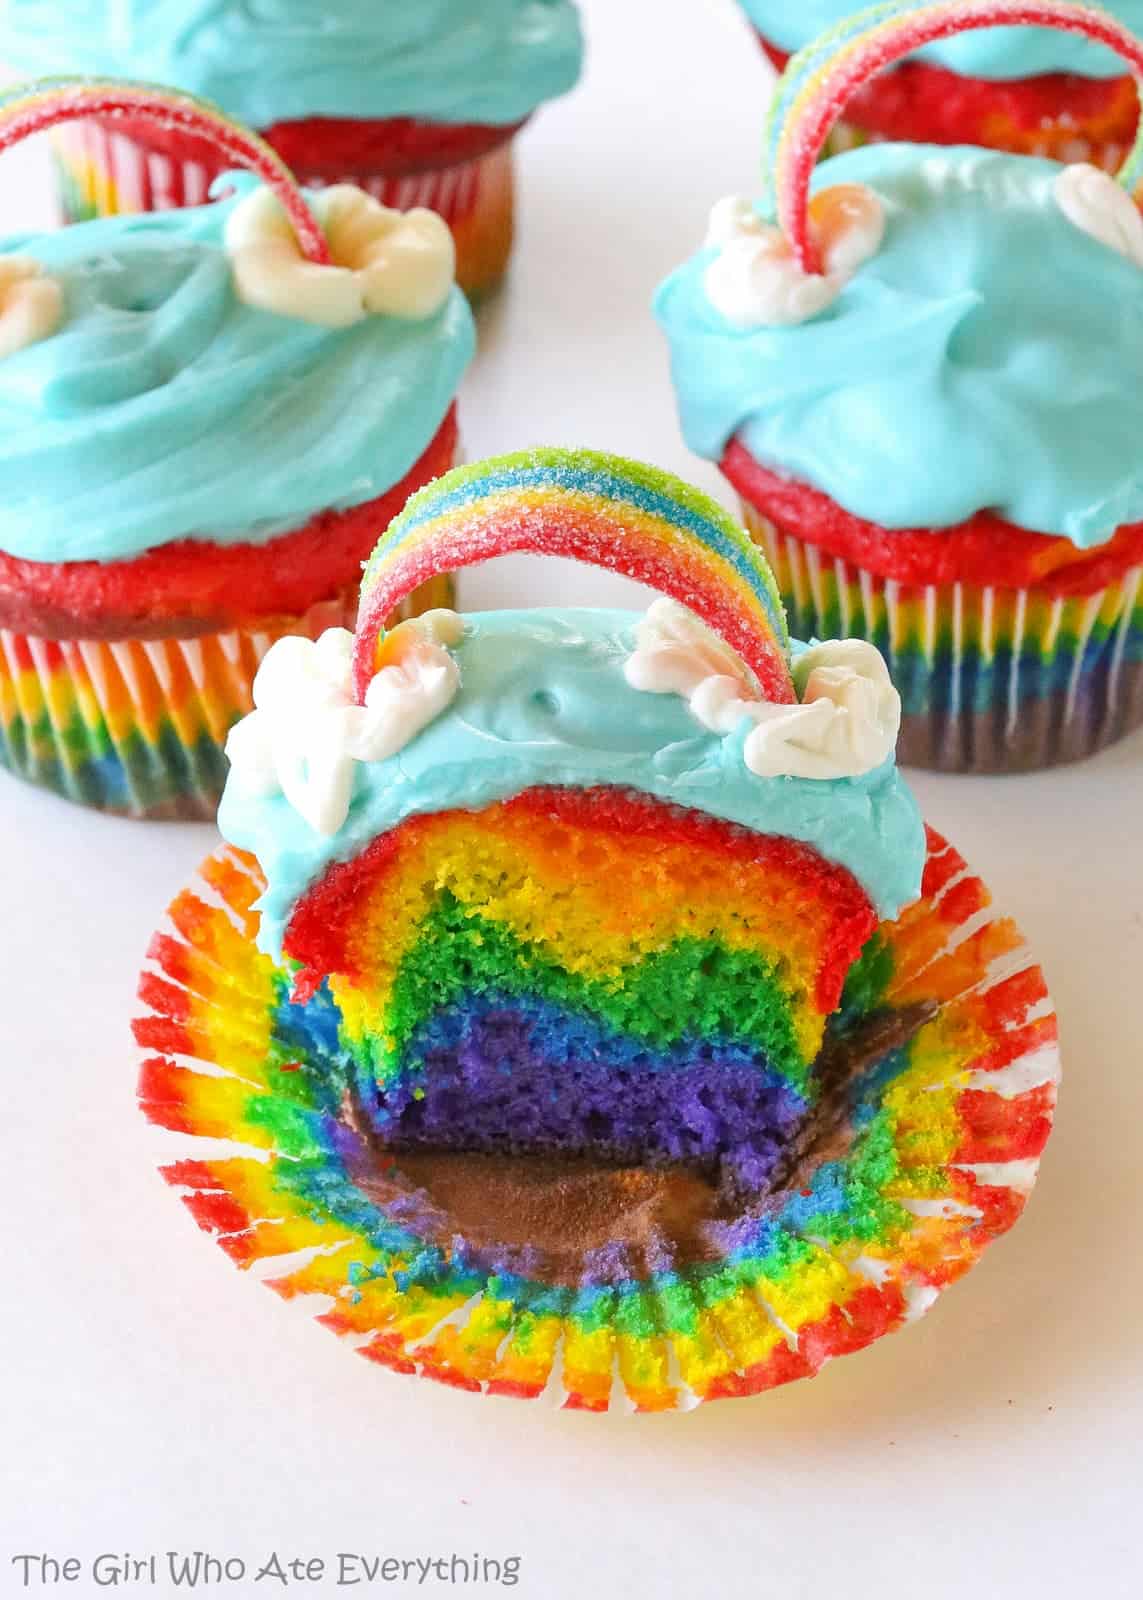 Rainbow Cupcakes Recipe The Girl Who Ate Everything,Tropical Fish Embroidery Designs